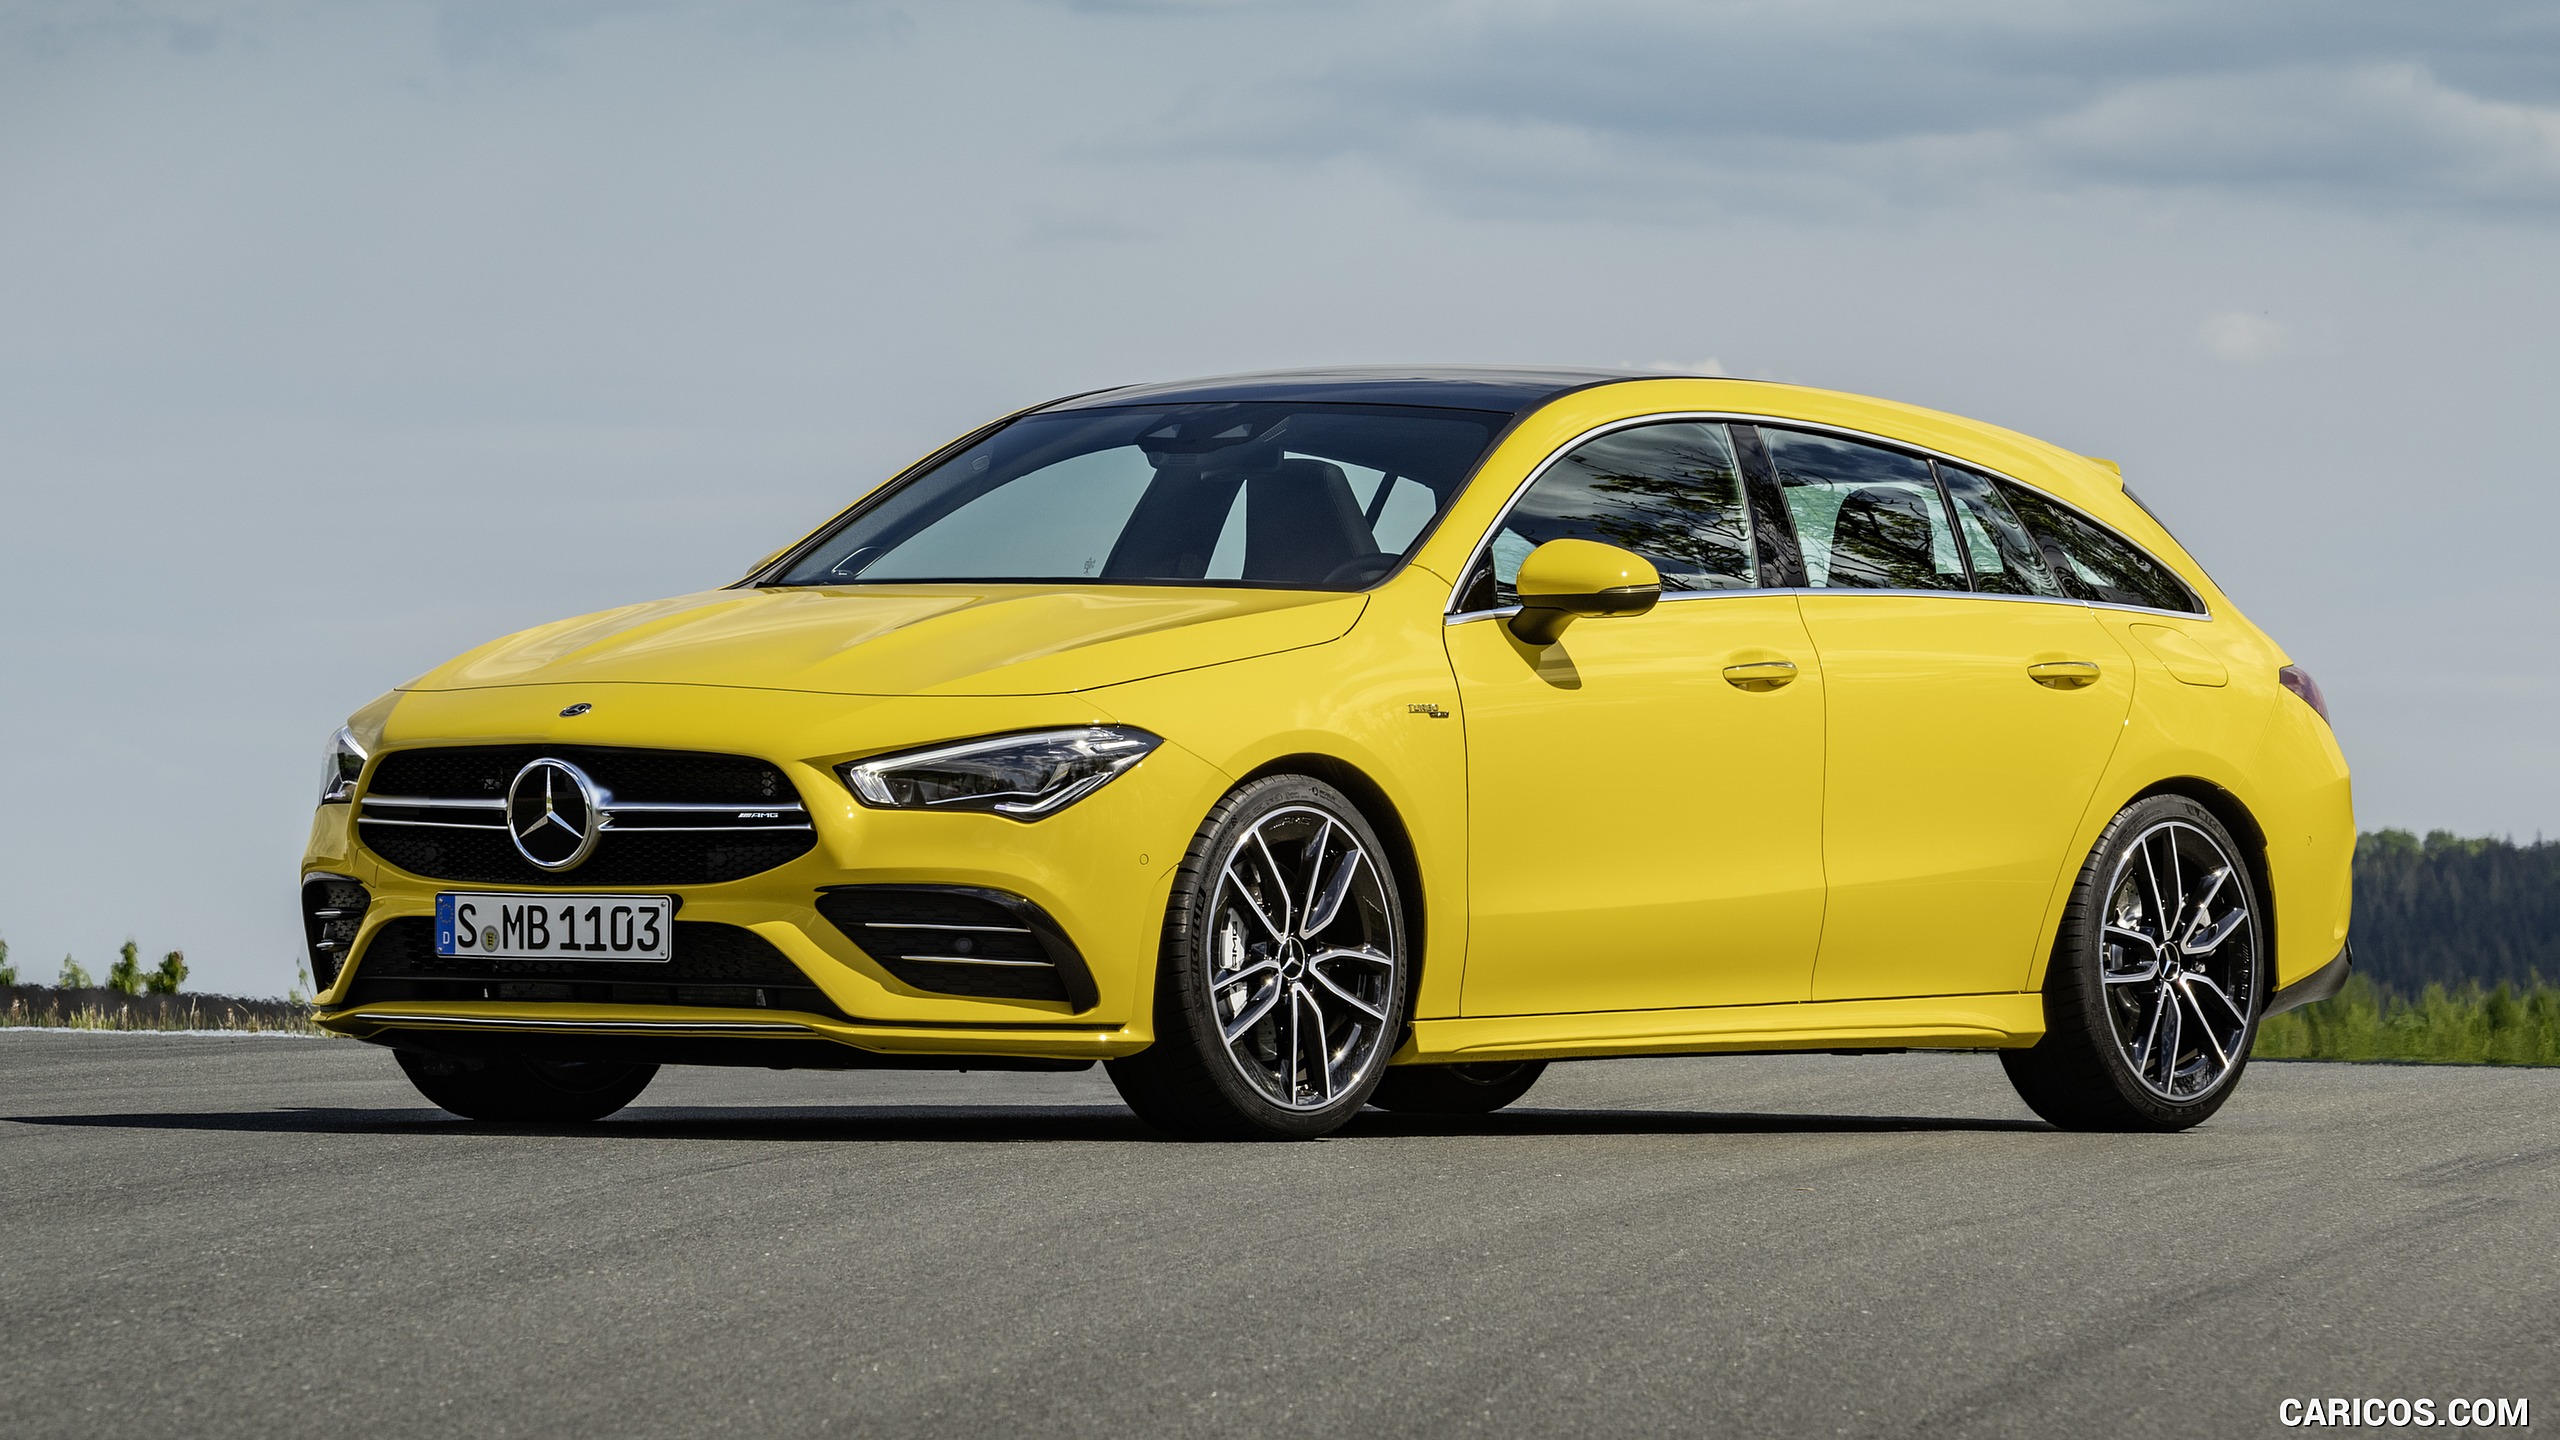 2020 Mercedes-AMG CLA 35 4MATIC Shooting Brake - Front Three-Quarter, #12 of 21